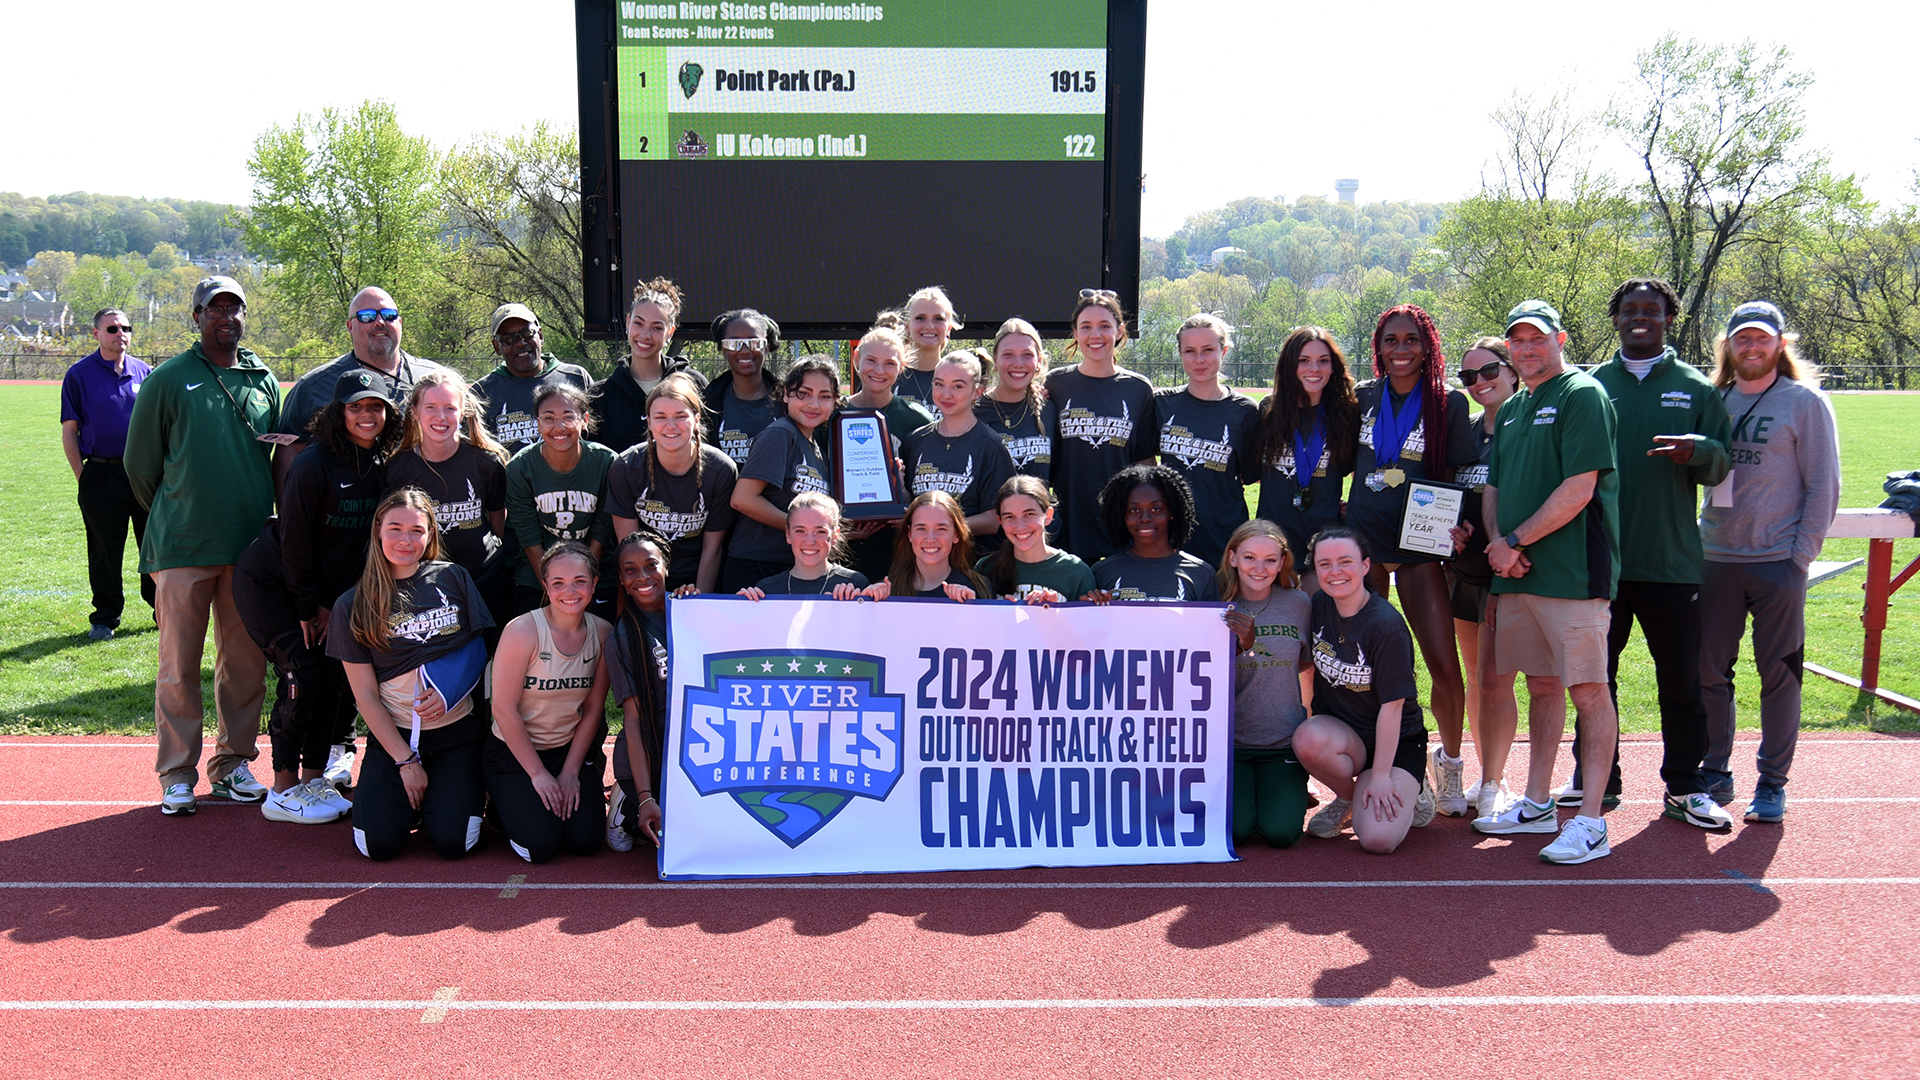 Point Park wins RSC Women's Outdoor Track & Field Championship for fourth time